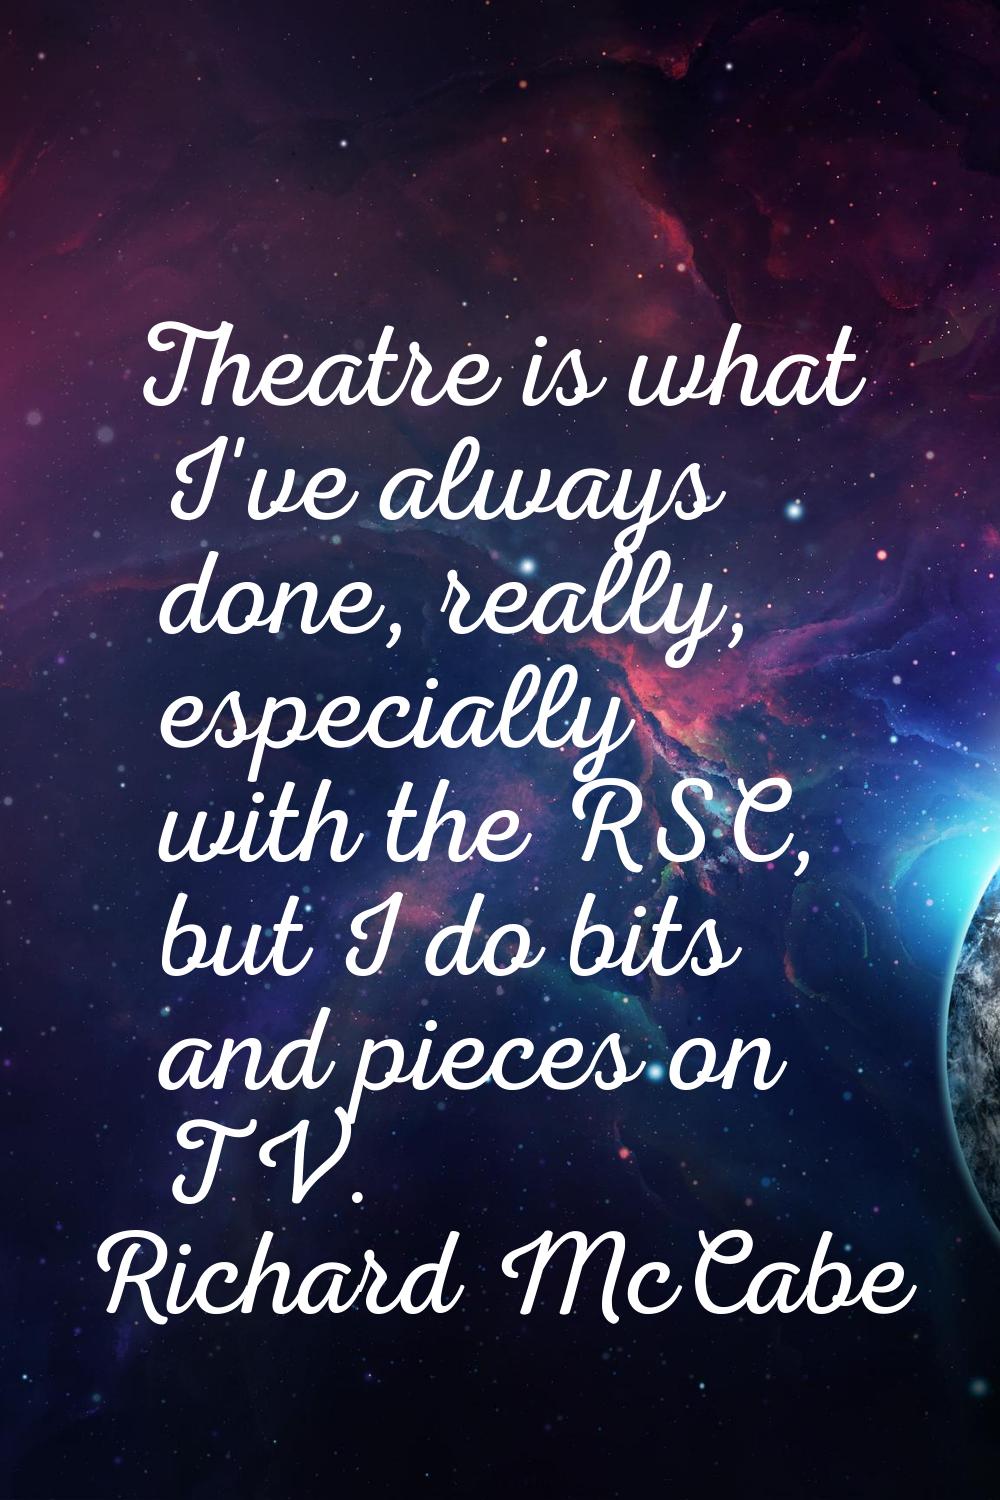 Theatre is what I've always done, really, especially with the RSC, but I do bits and pieces on TV.